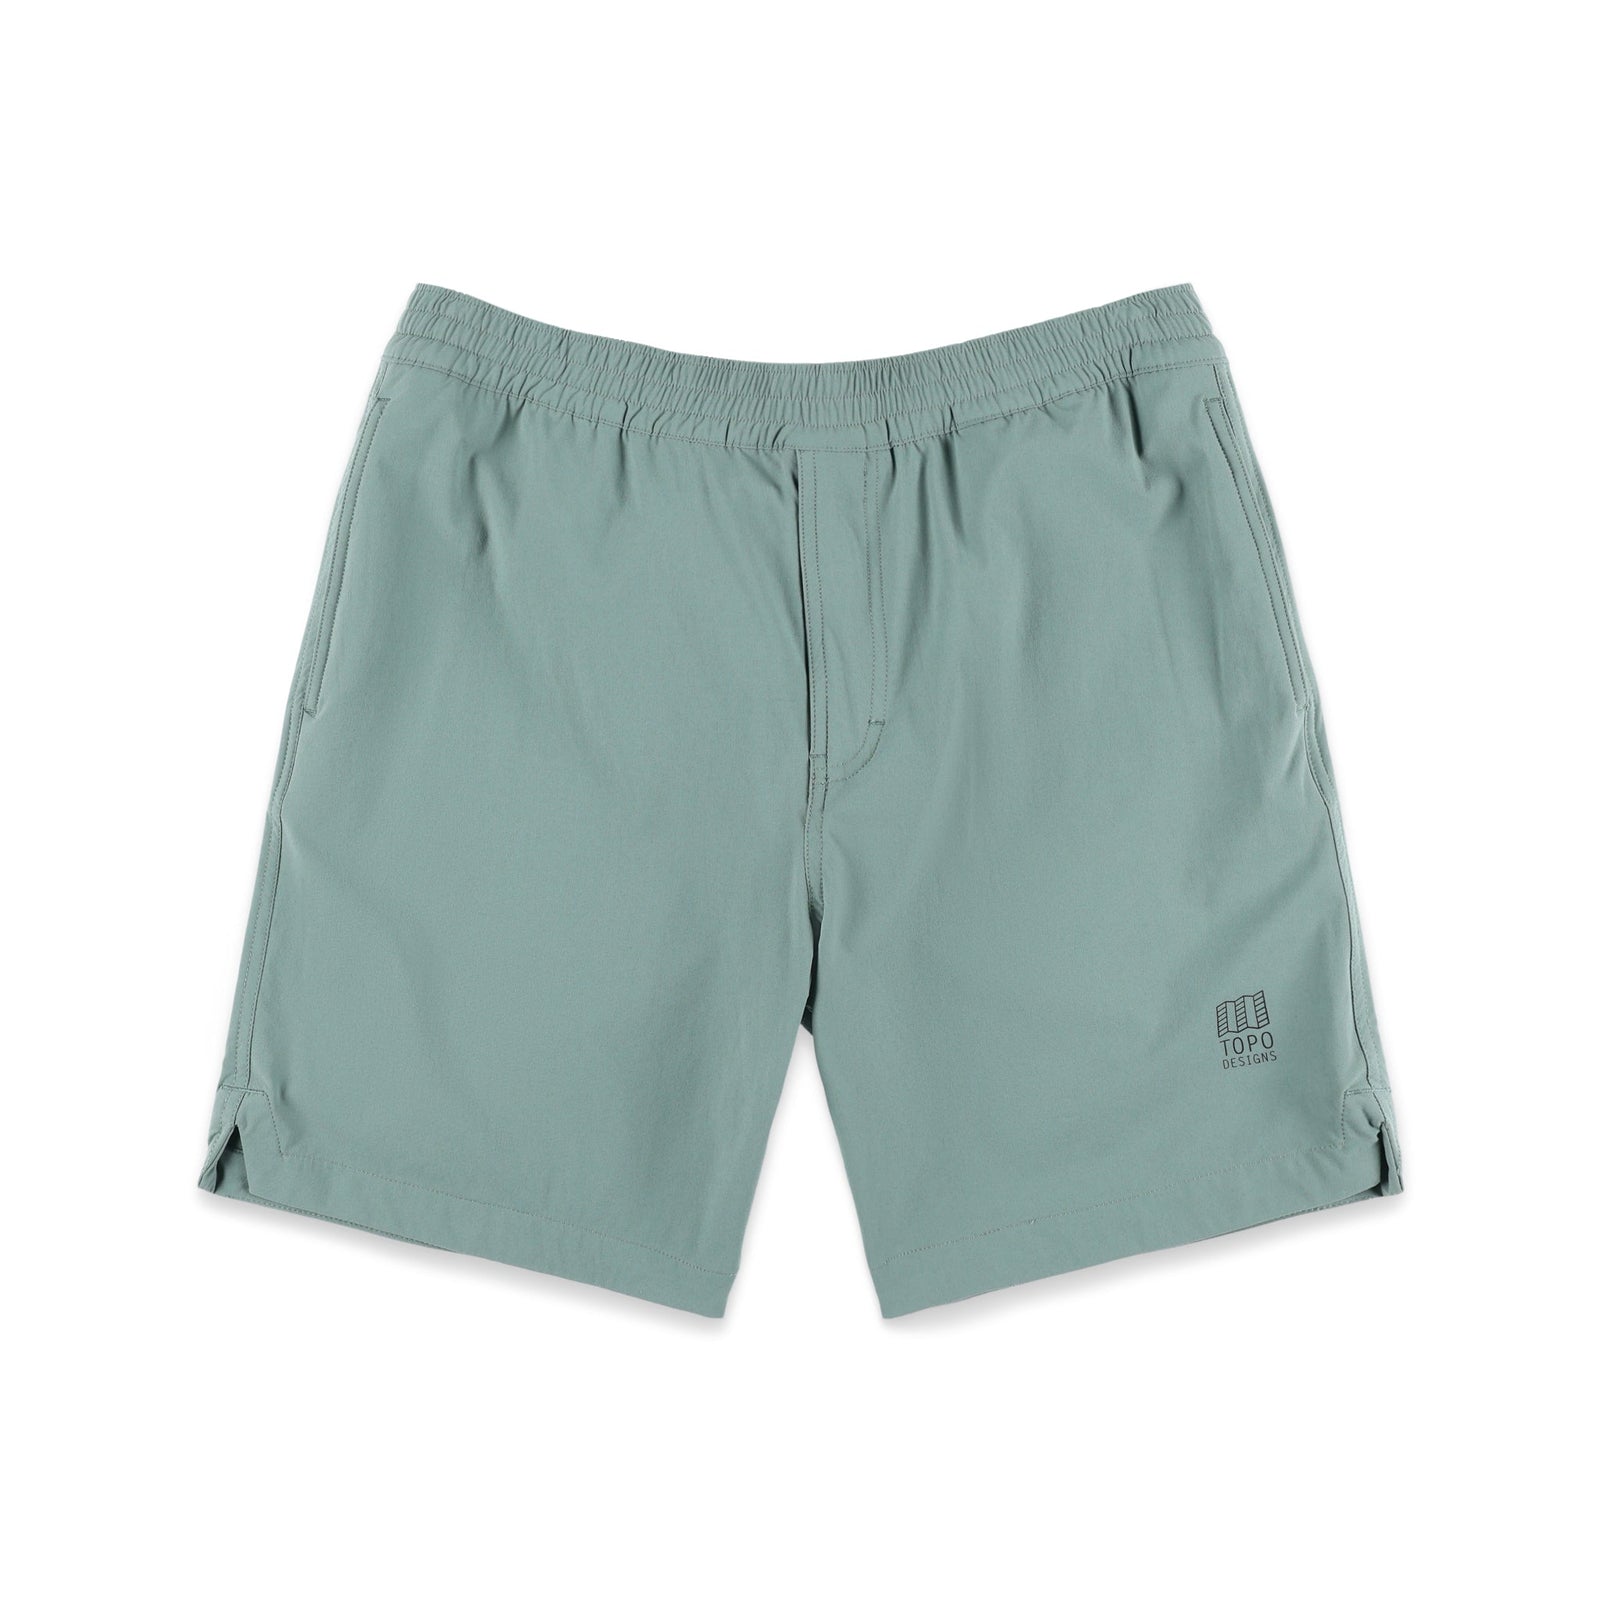 Topo Designs Men's Global lightweight quick dry travel Shorts in "Slate" blue.